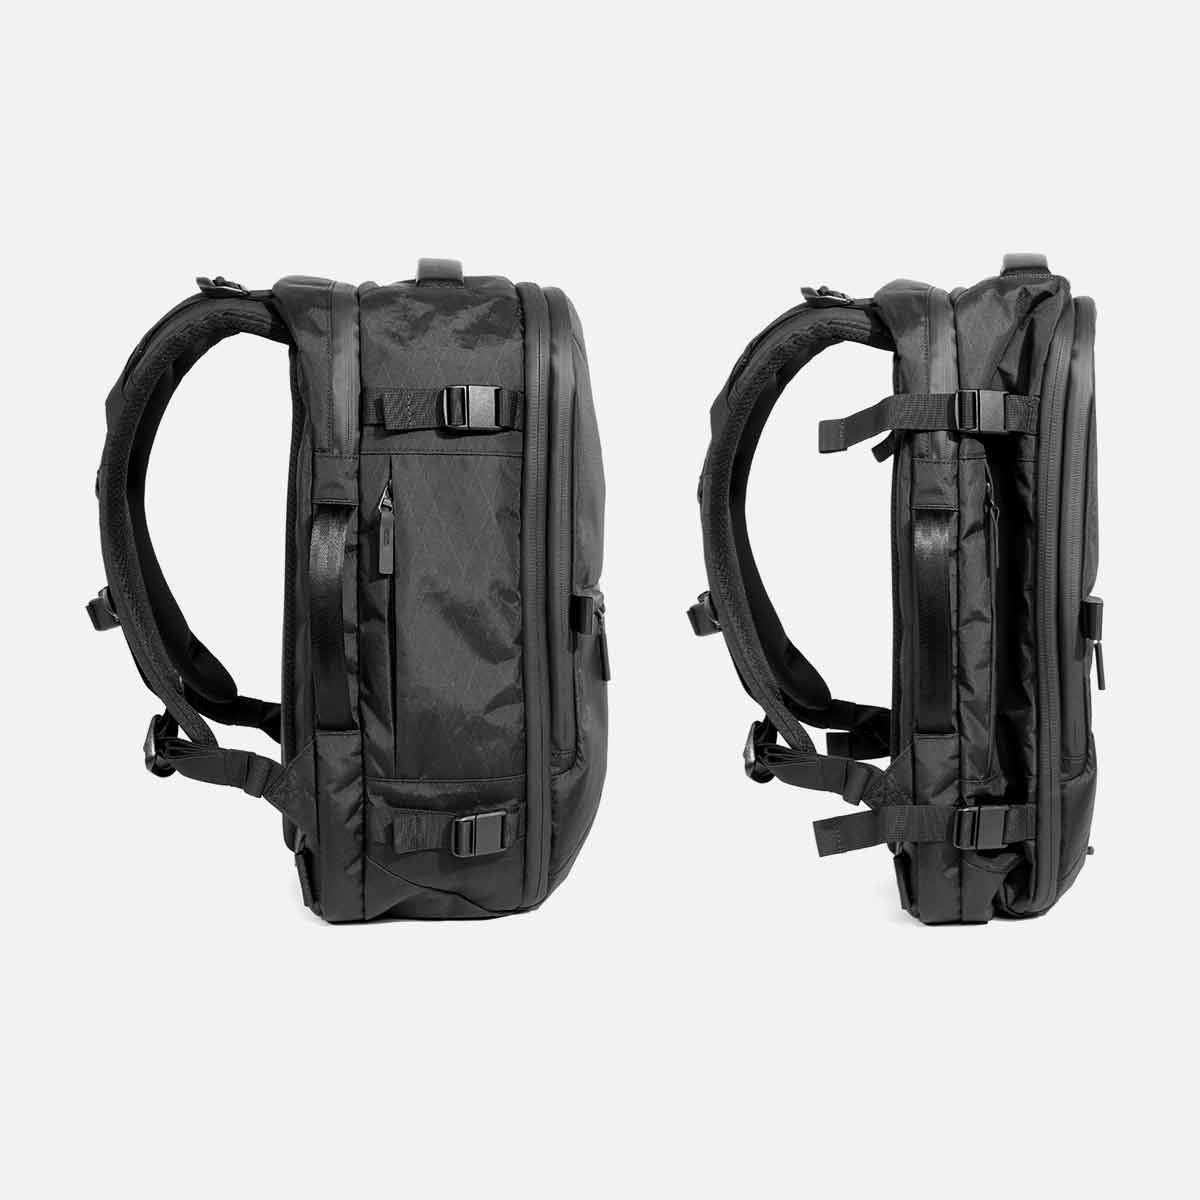 AER】Travel Pack 3 Small X-Pac(Free Black)｜ MSPCプロダクト ソート ...